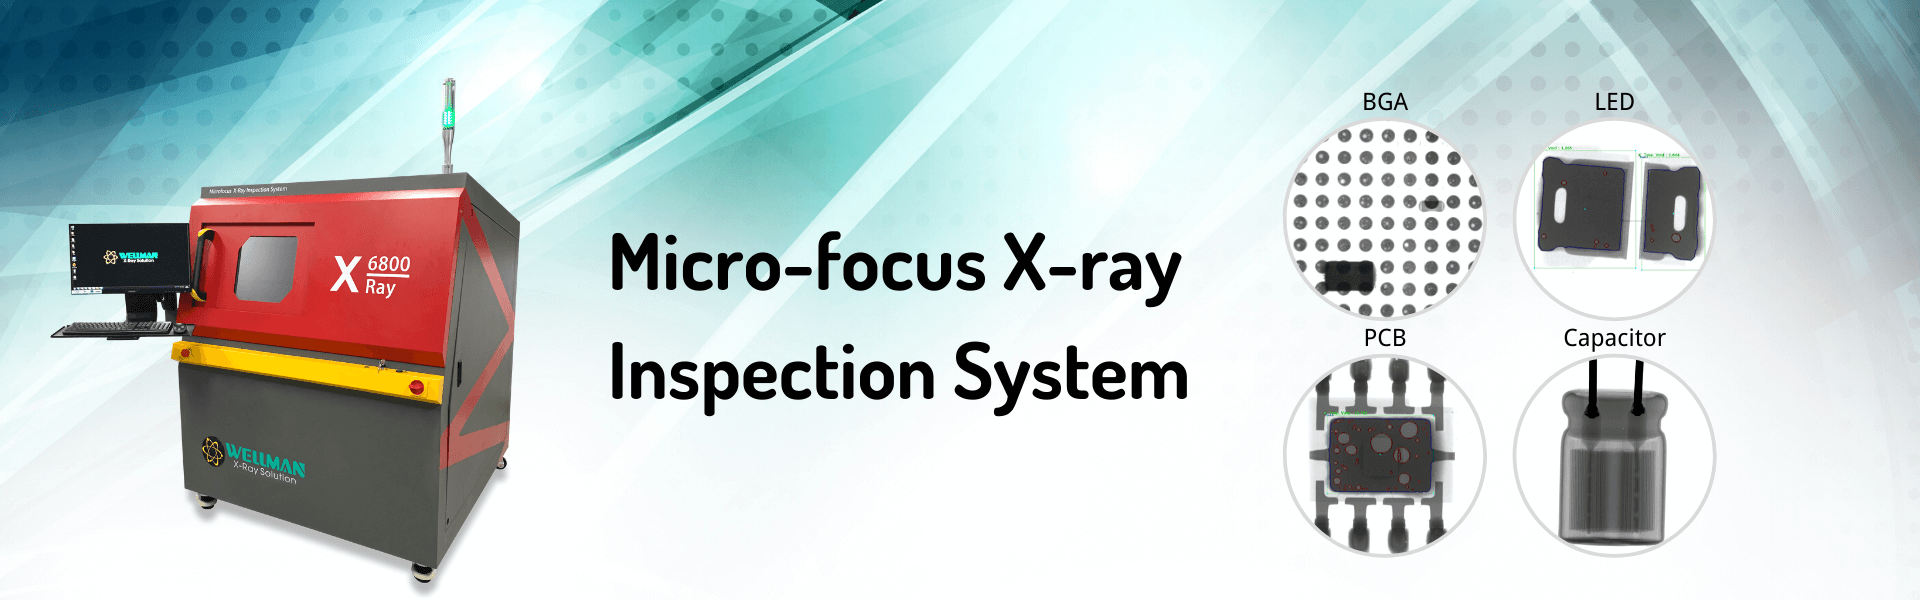 Microfocus X-ray inspection system